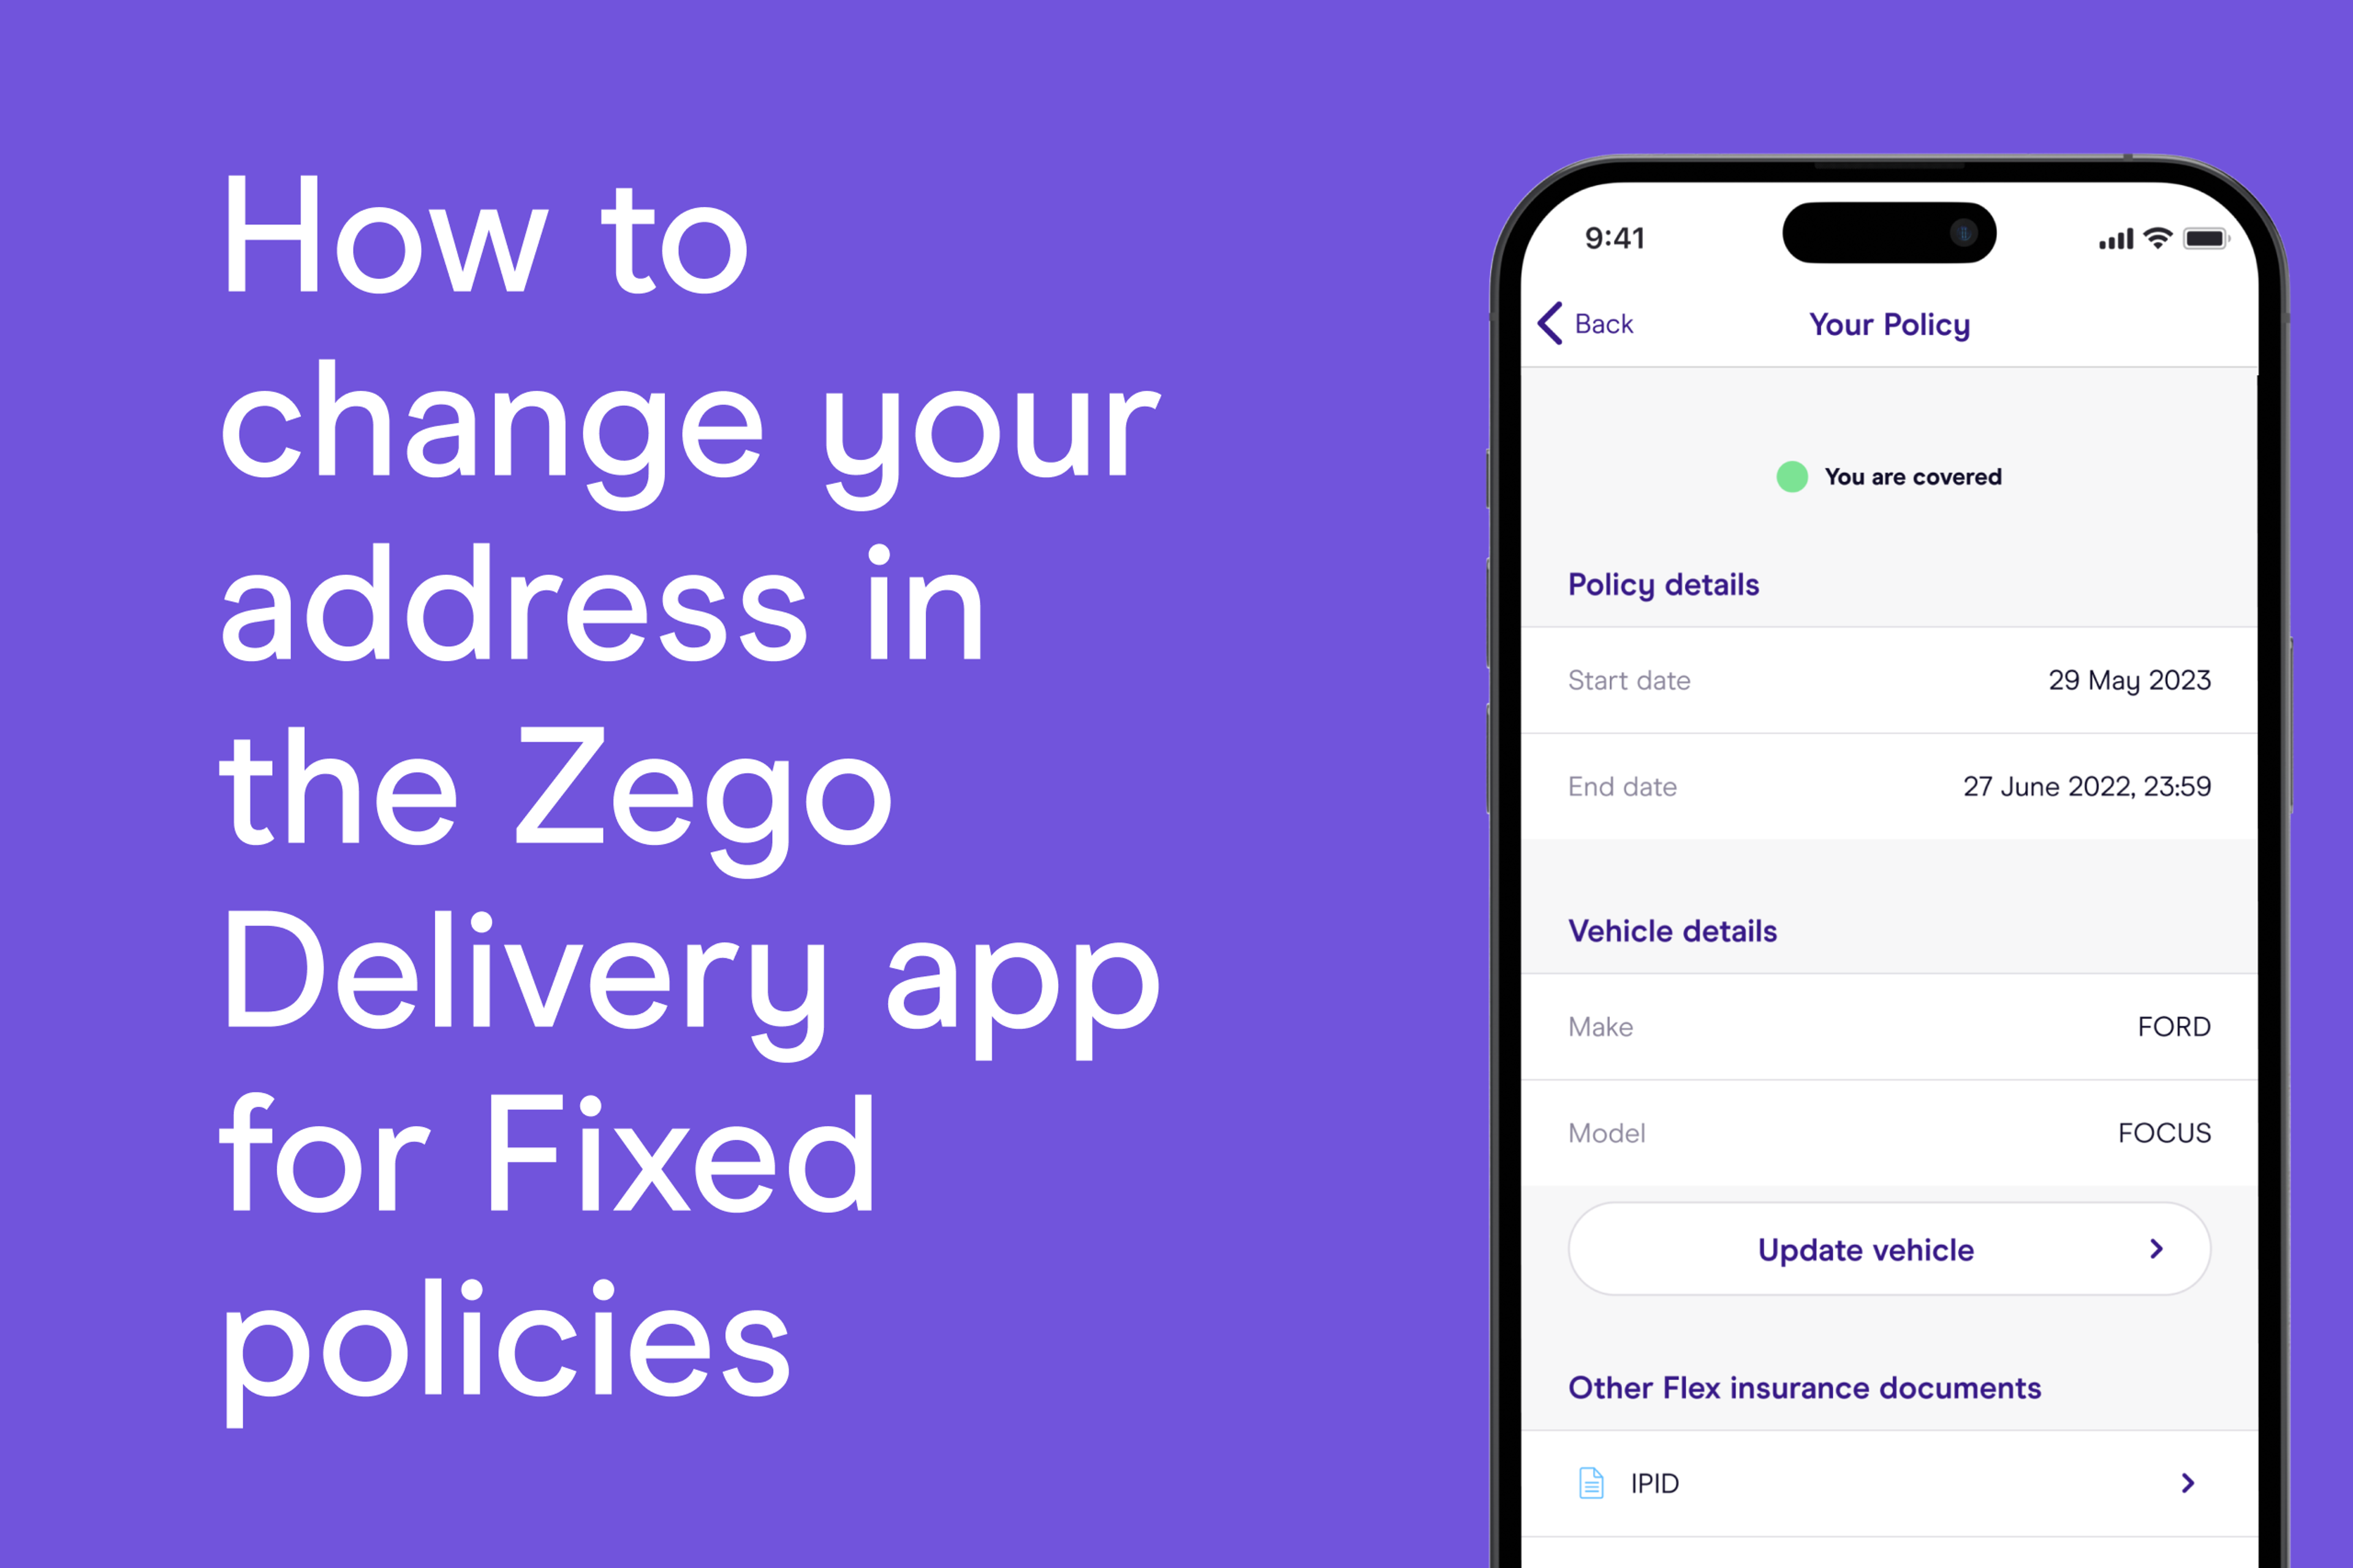 How to change your address in the Zego Delivery app for Fixed policies